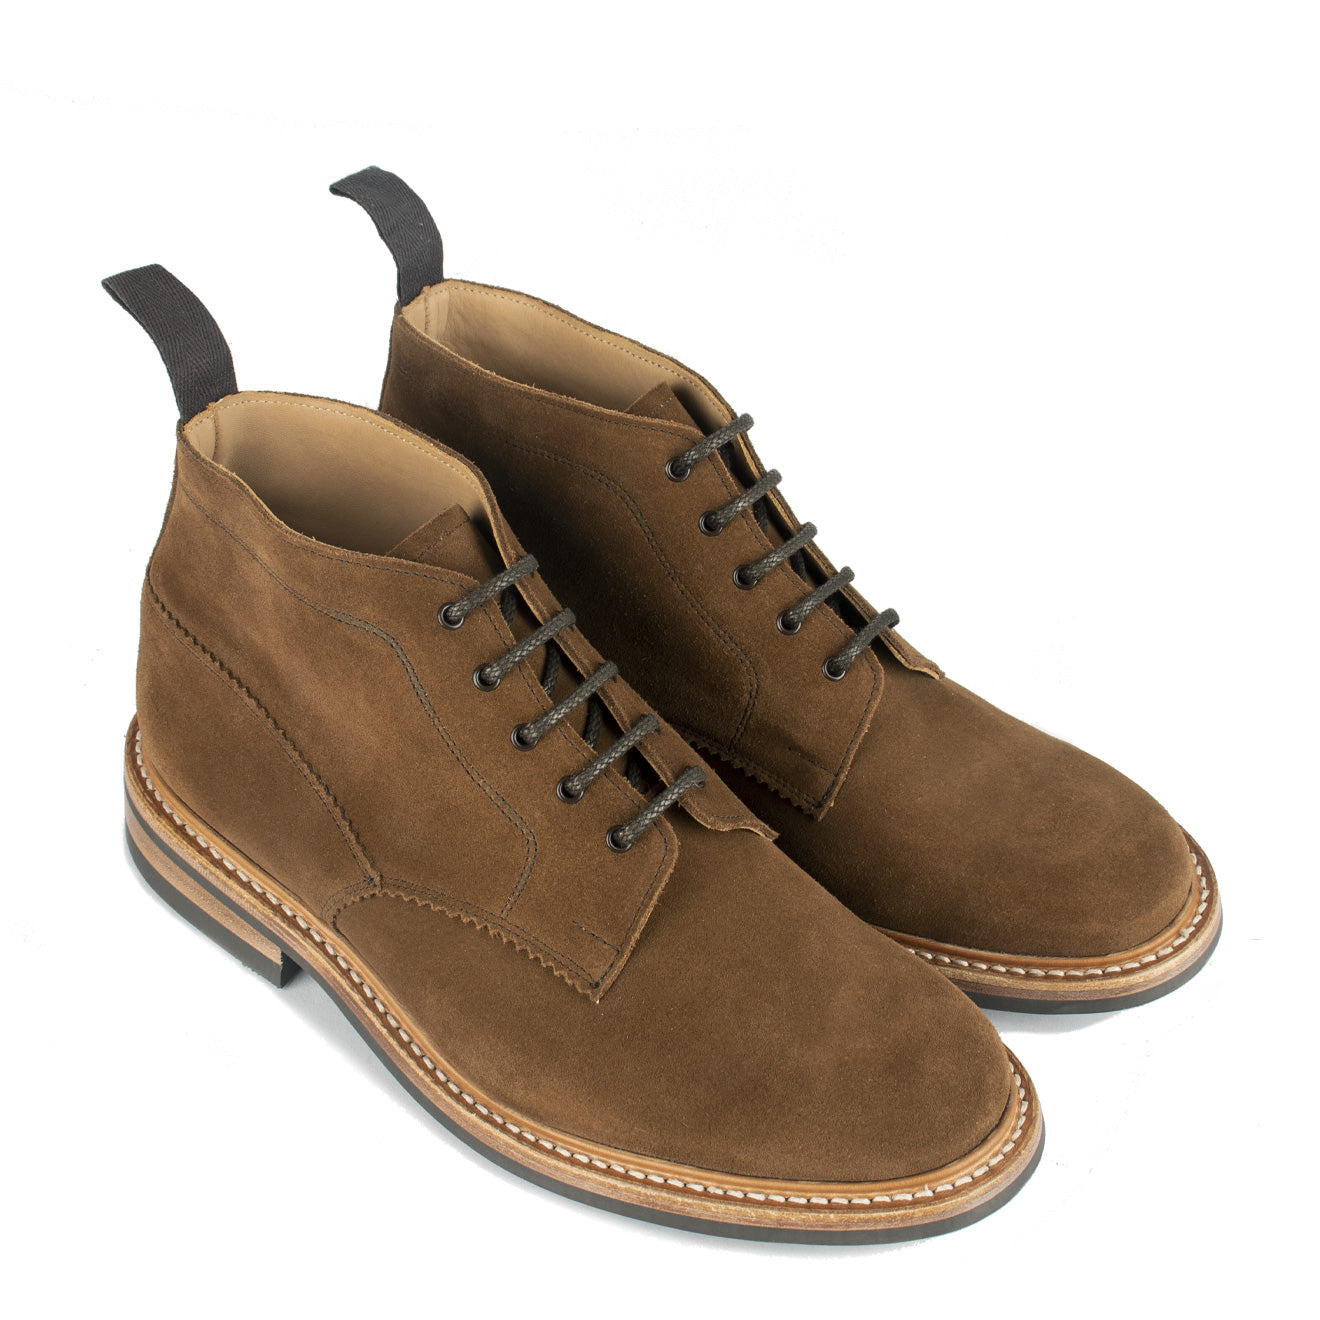 Trickers Evedon Chukka Boot Snuff | The Sporting Lodge